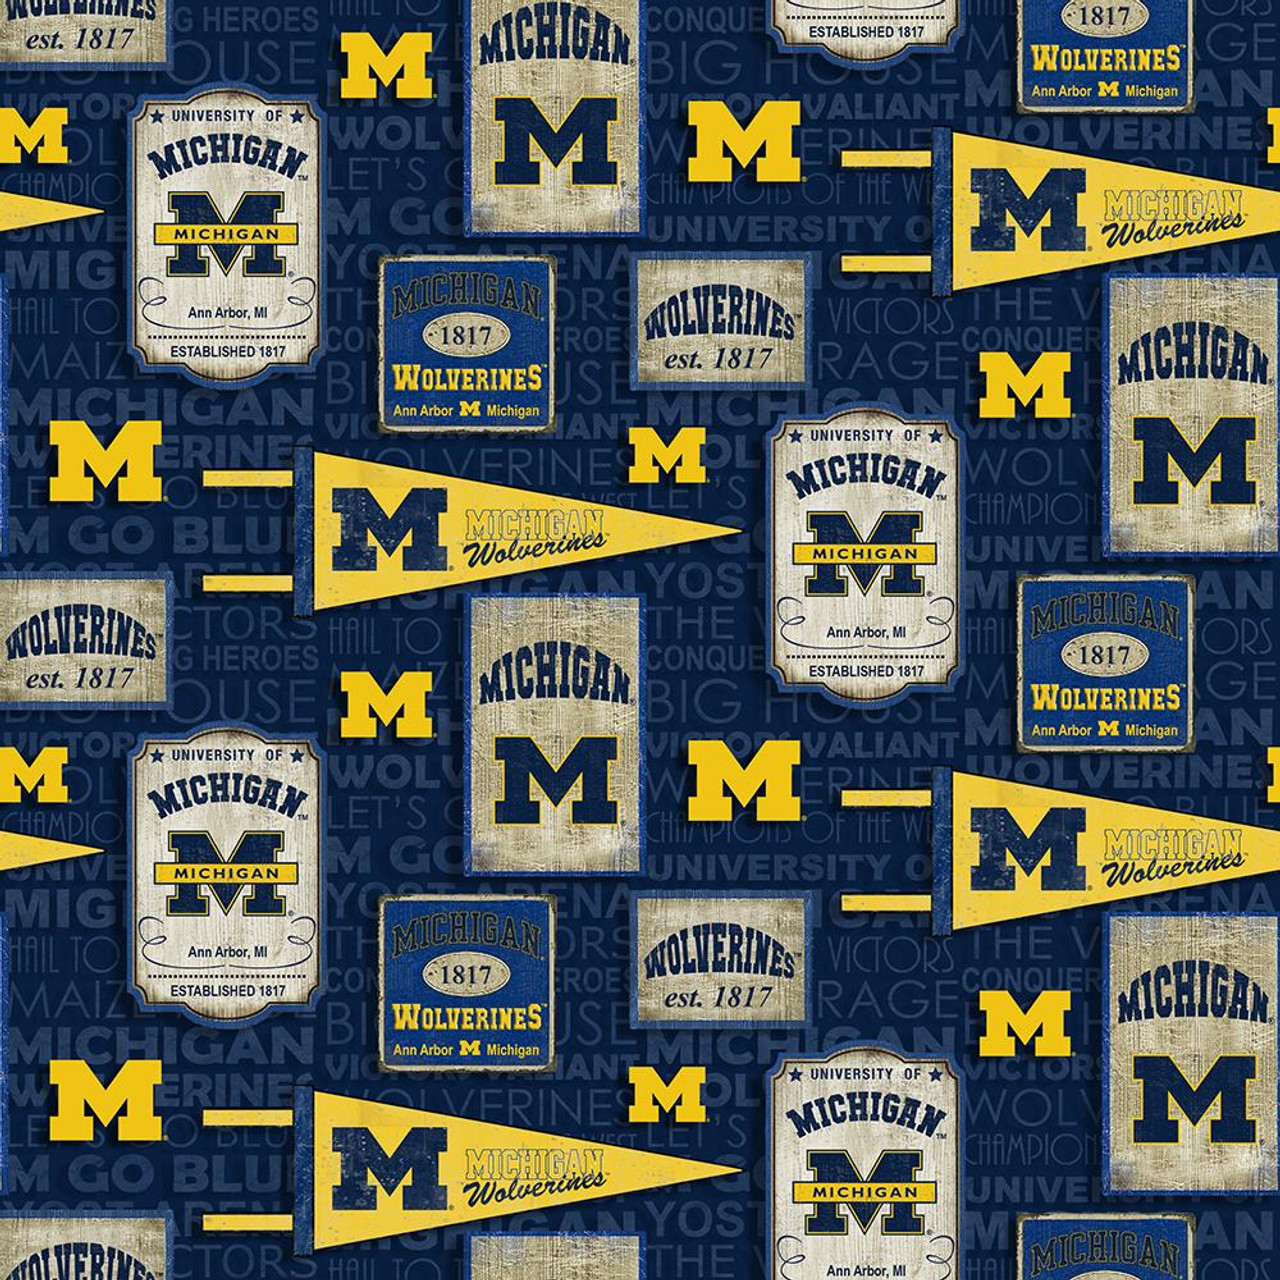 University of Michigan Wolverines Cotton Fabric with Vintage Pennant Print or Matching Solid Cotton Fabrics